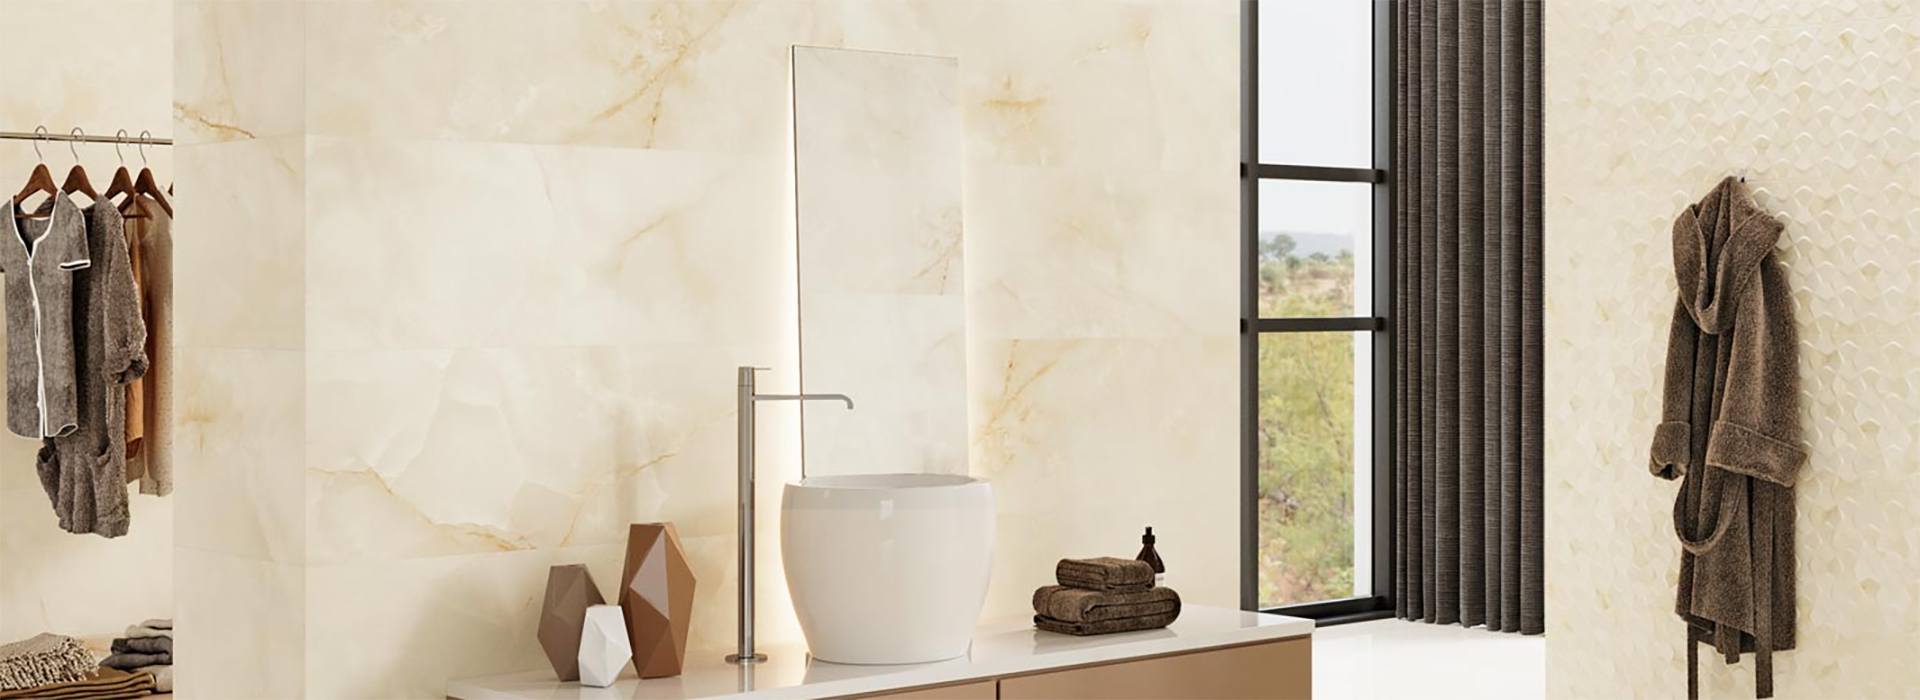 Italtile Adds An Exciting New Collection Of Spanish Wall Tiles To Its International Portfolio